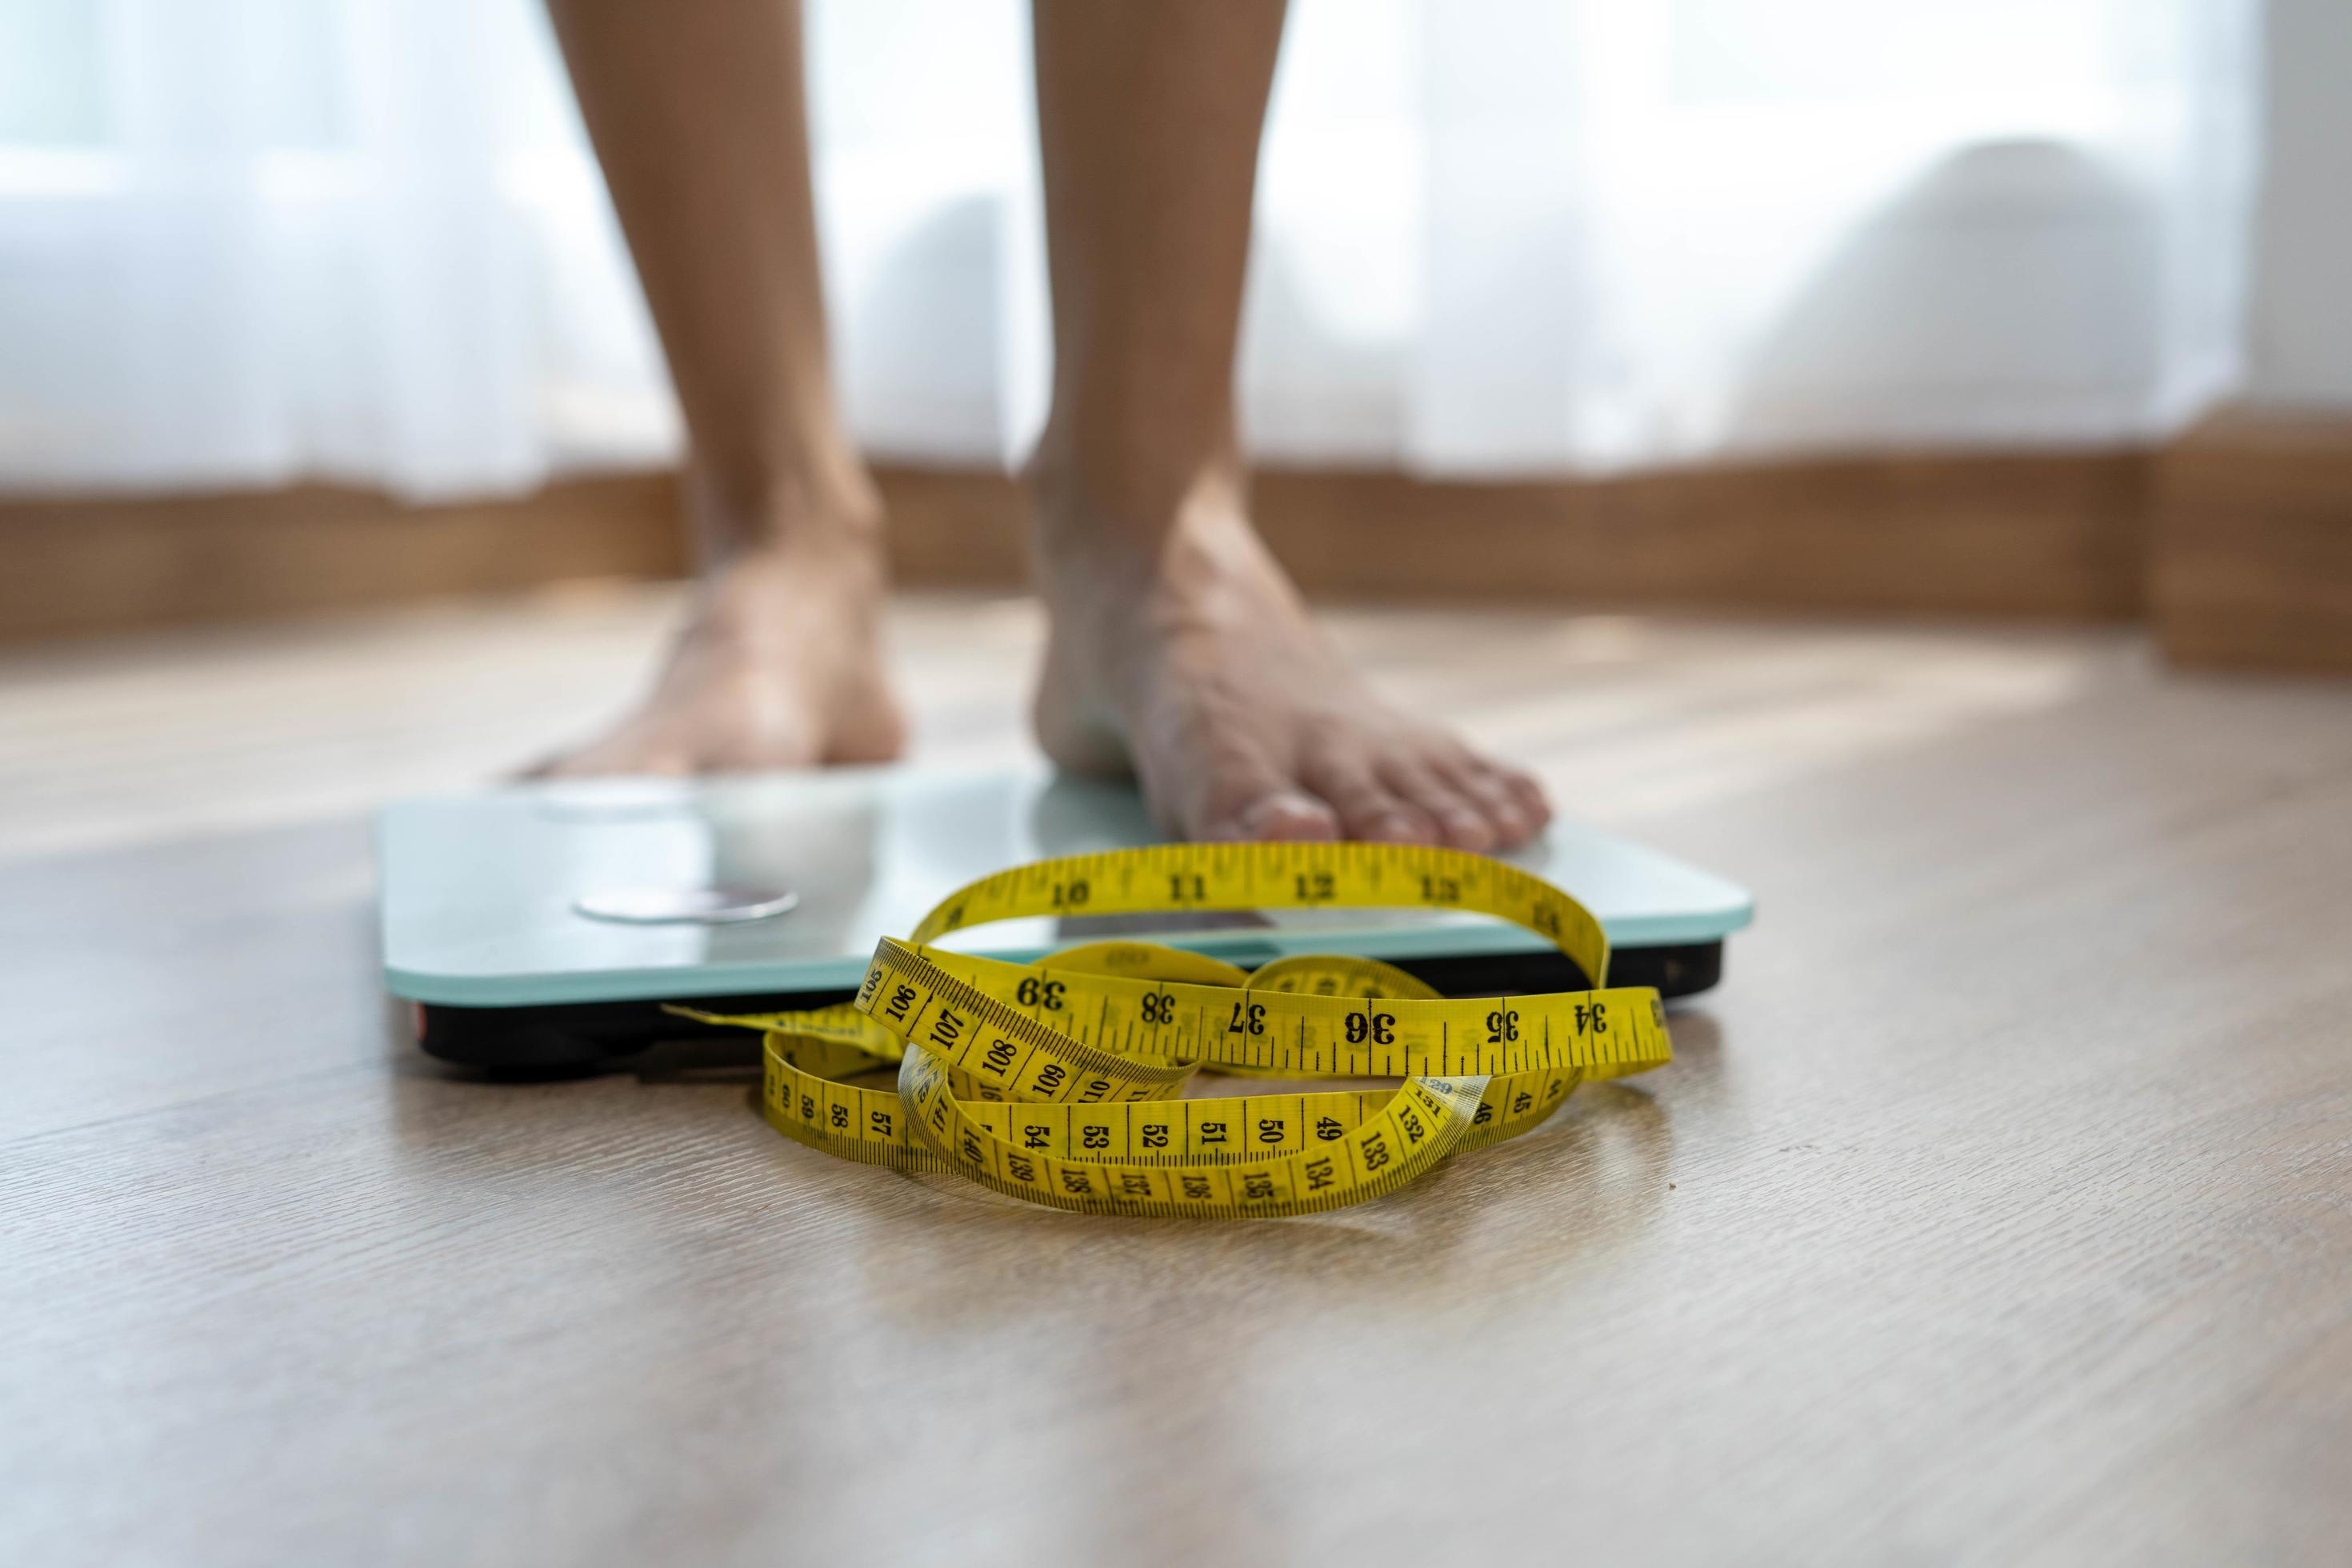 https://static.vecteezy.com/system/resources/previews/017/154/858/large_2x/women-stand-on-electronic-scales-with-measuring-cables-requiring-weight-control-woman-foot-stepping-on-weigh-scales-with-tape-measure-diet-concept-free-photo.jpg